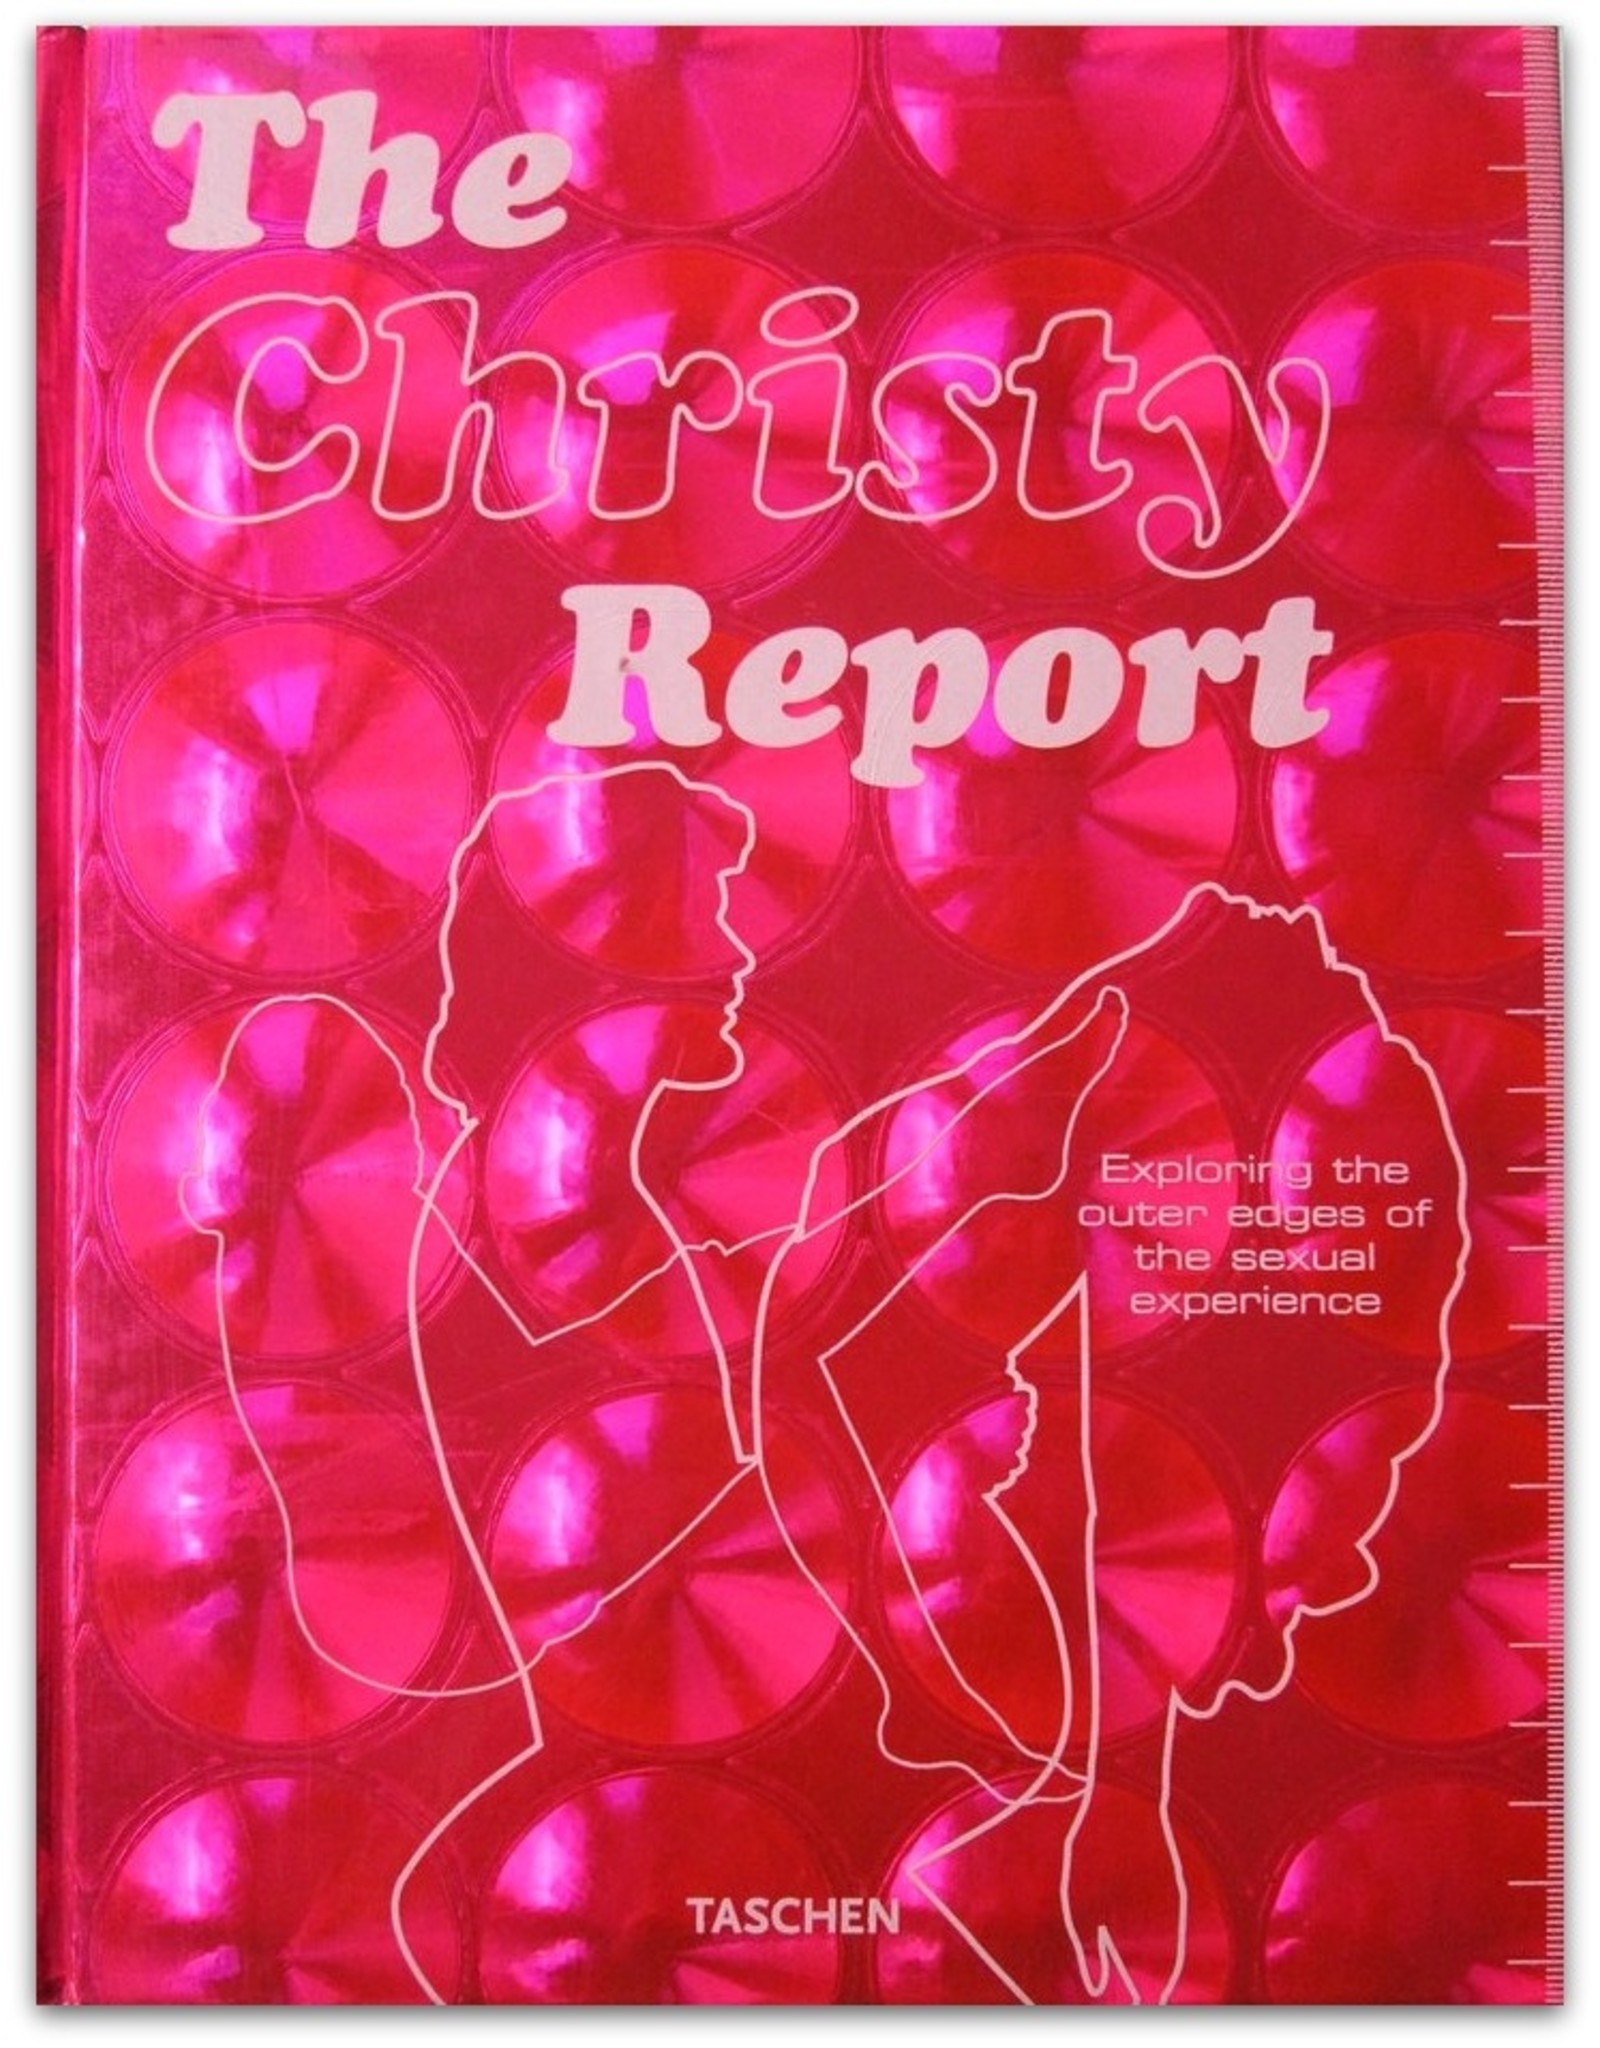 John Quinn & Kim Christy - The Christy Report: Exploring the Outer Edges of the Sexual Experience